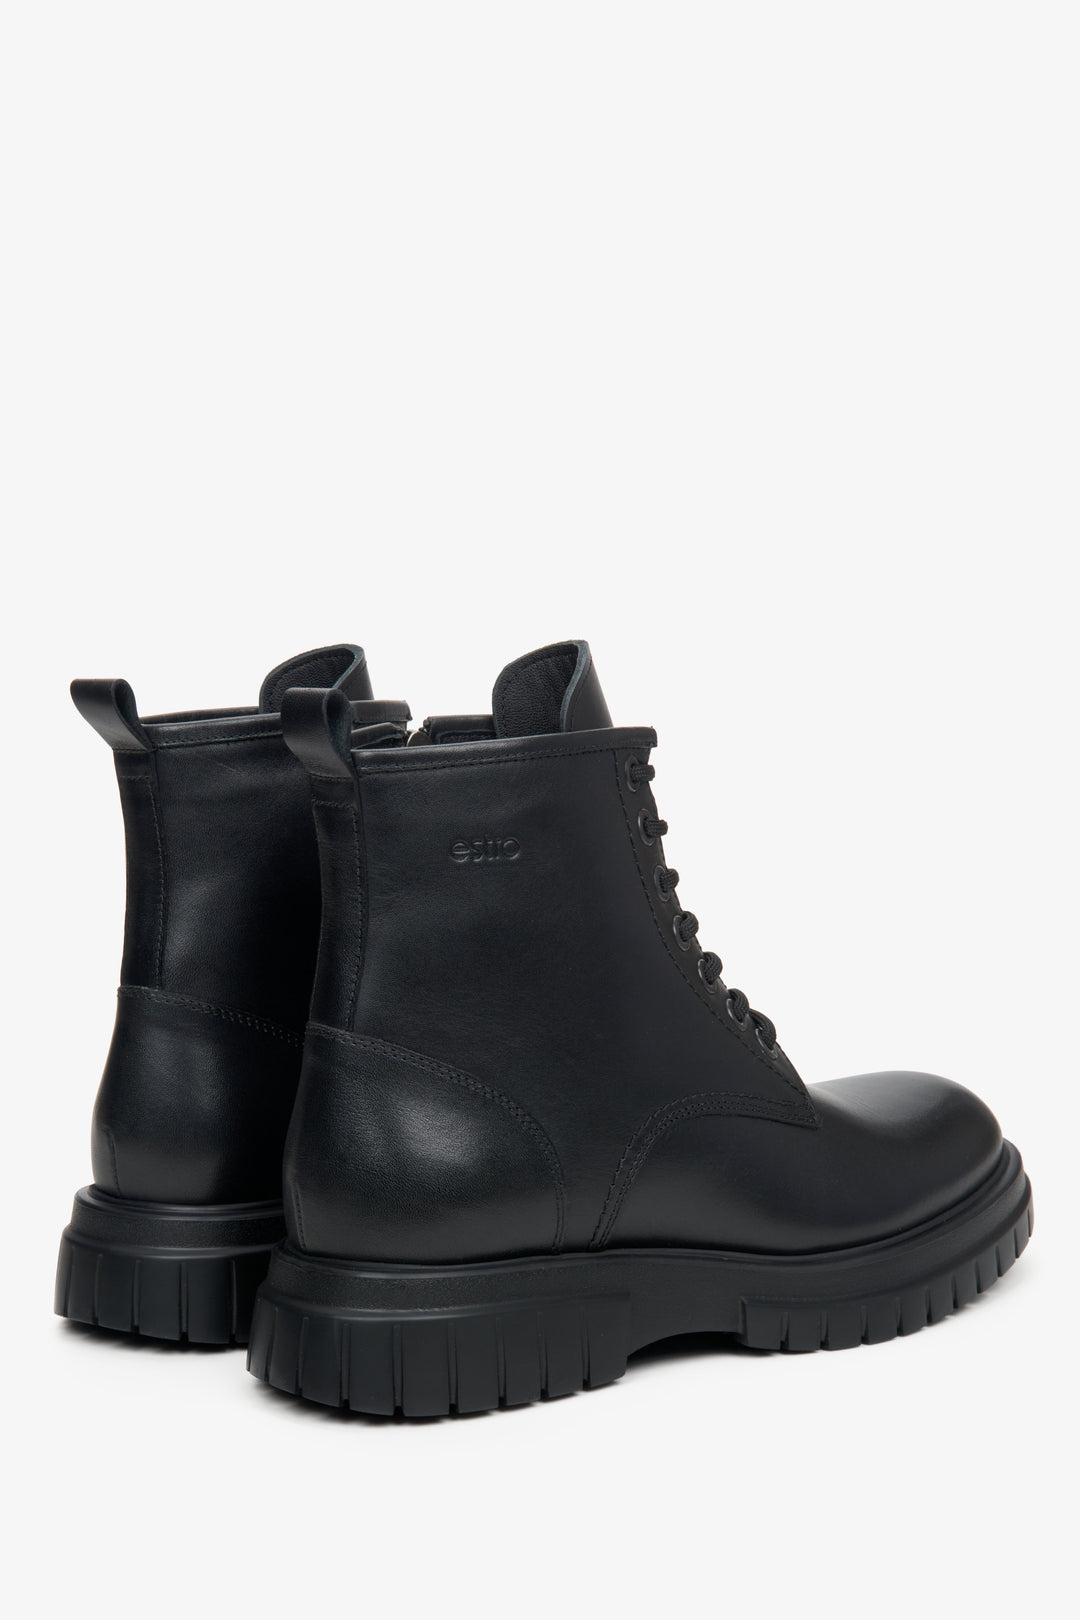 Men's  black leather winter ankle boots.